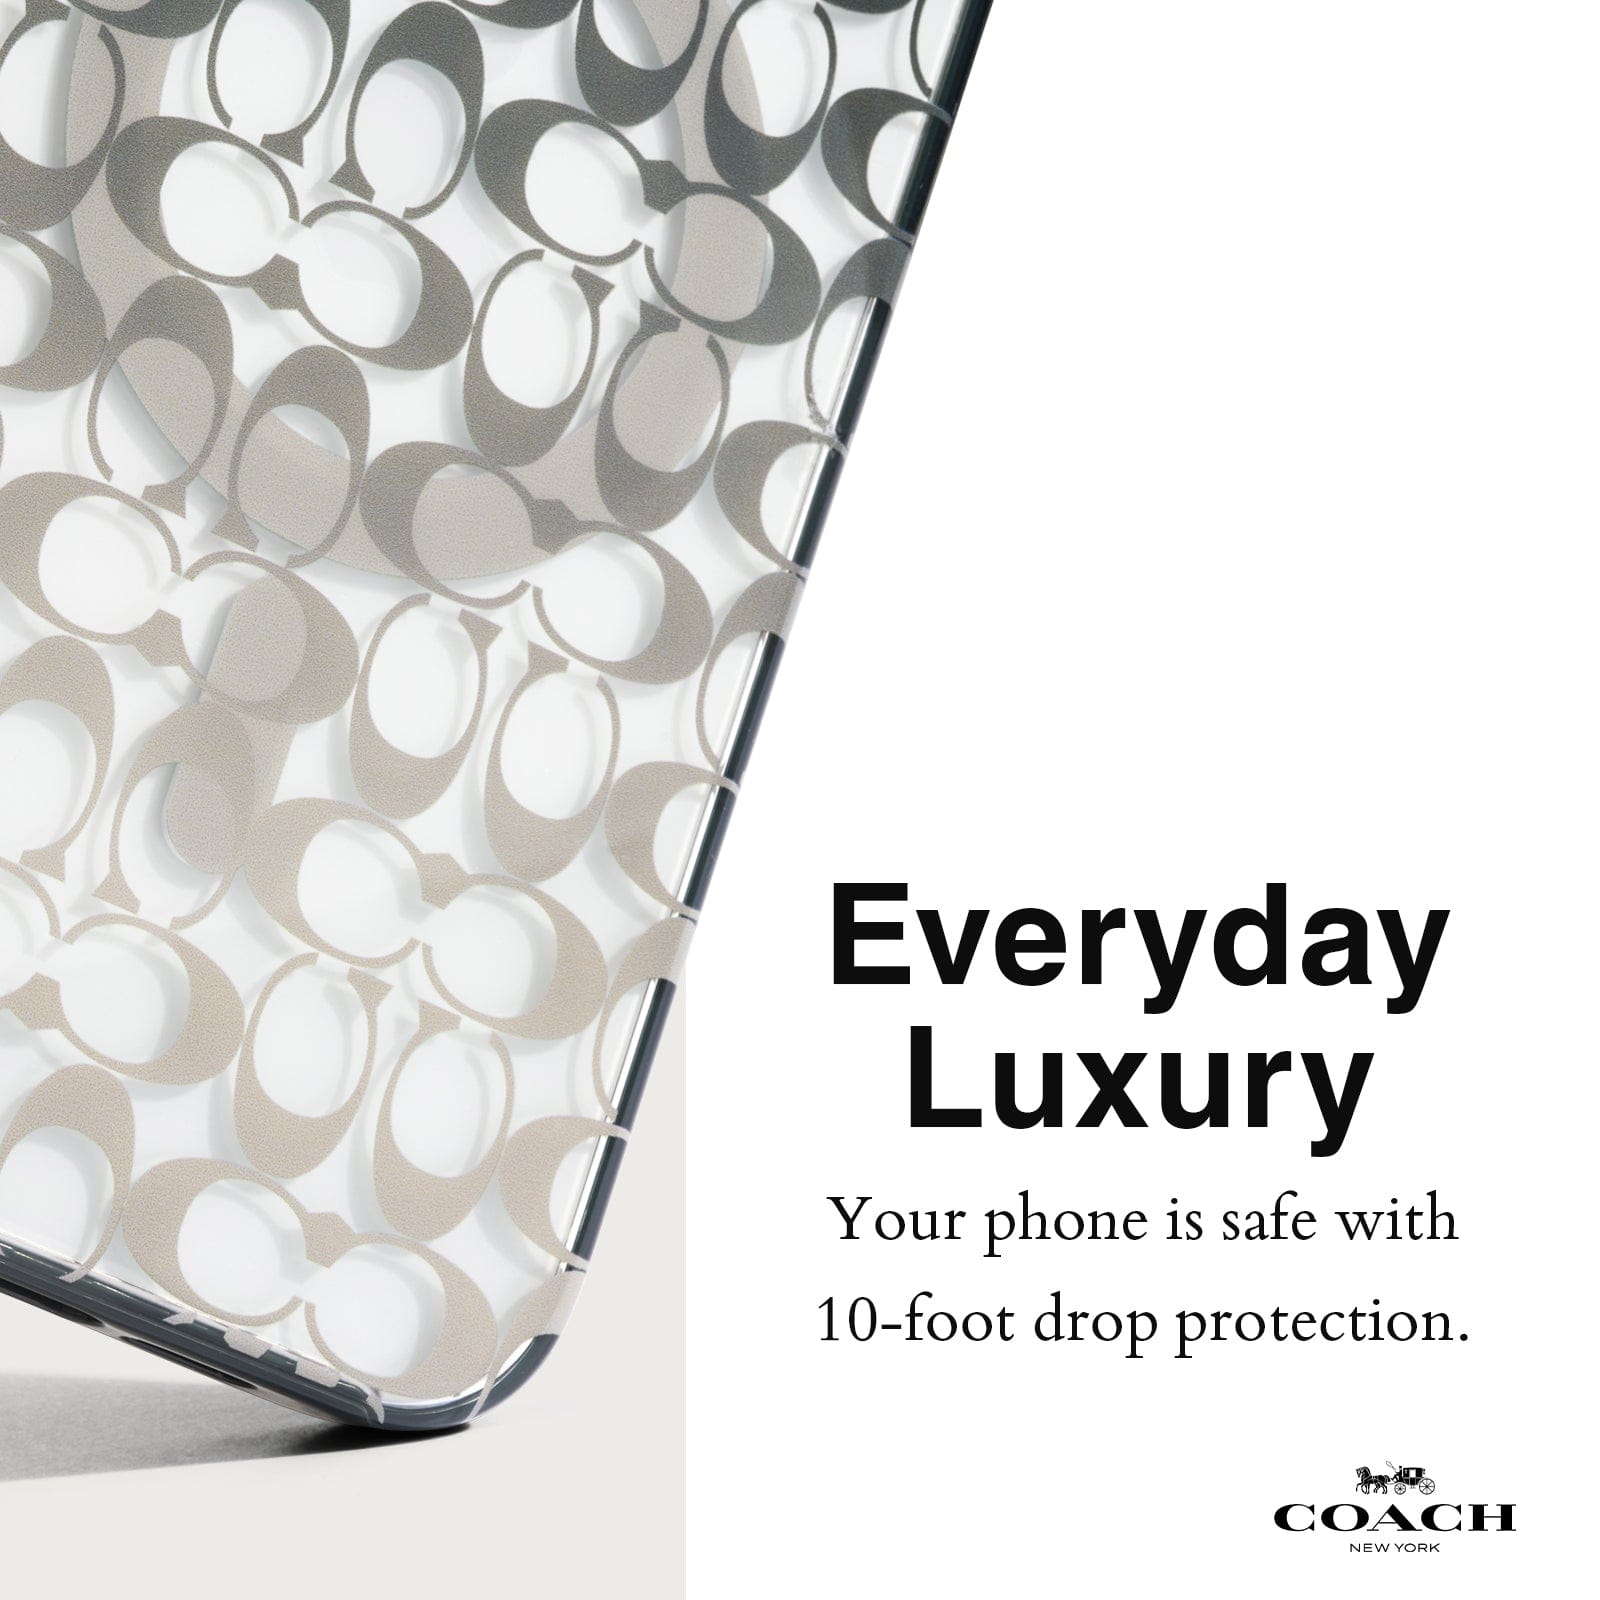 EVERYDAY LUXURY. YOUR PHONE IS SAFE WITH 10-FOOT DROP PROTECTION.